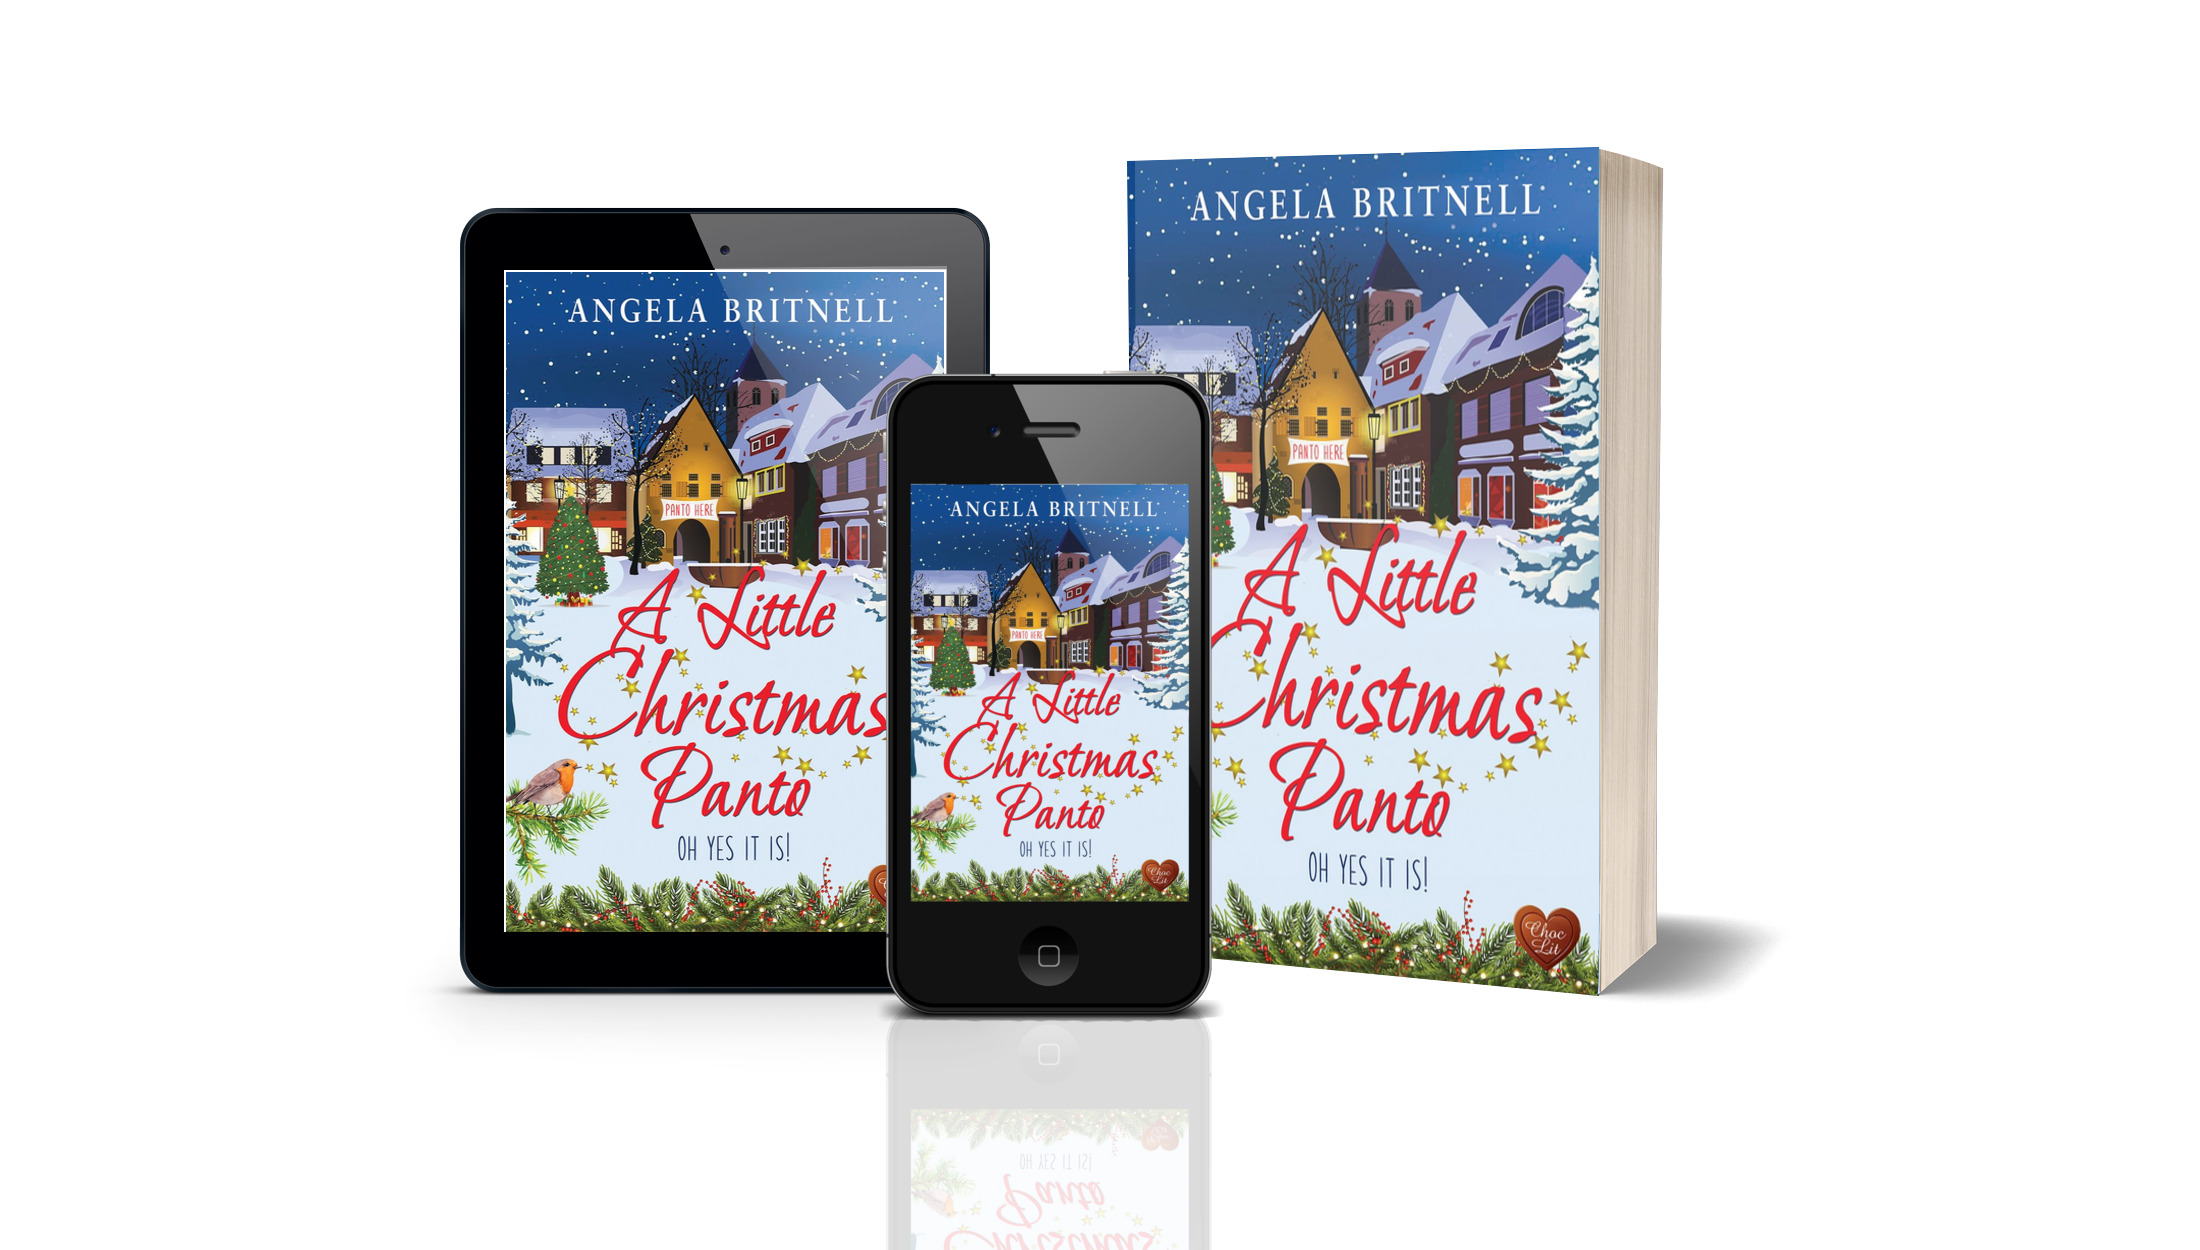 Angela Britnell – A Little Christmas Panto